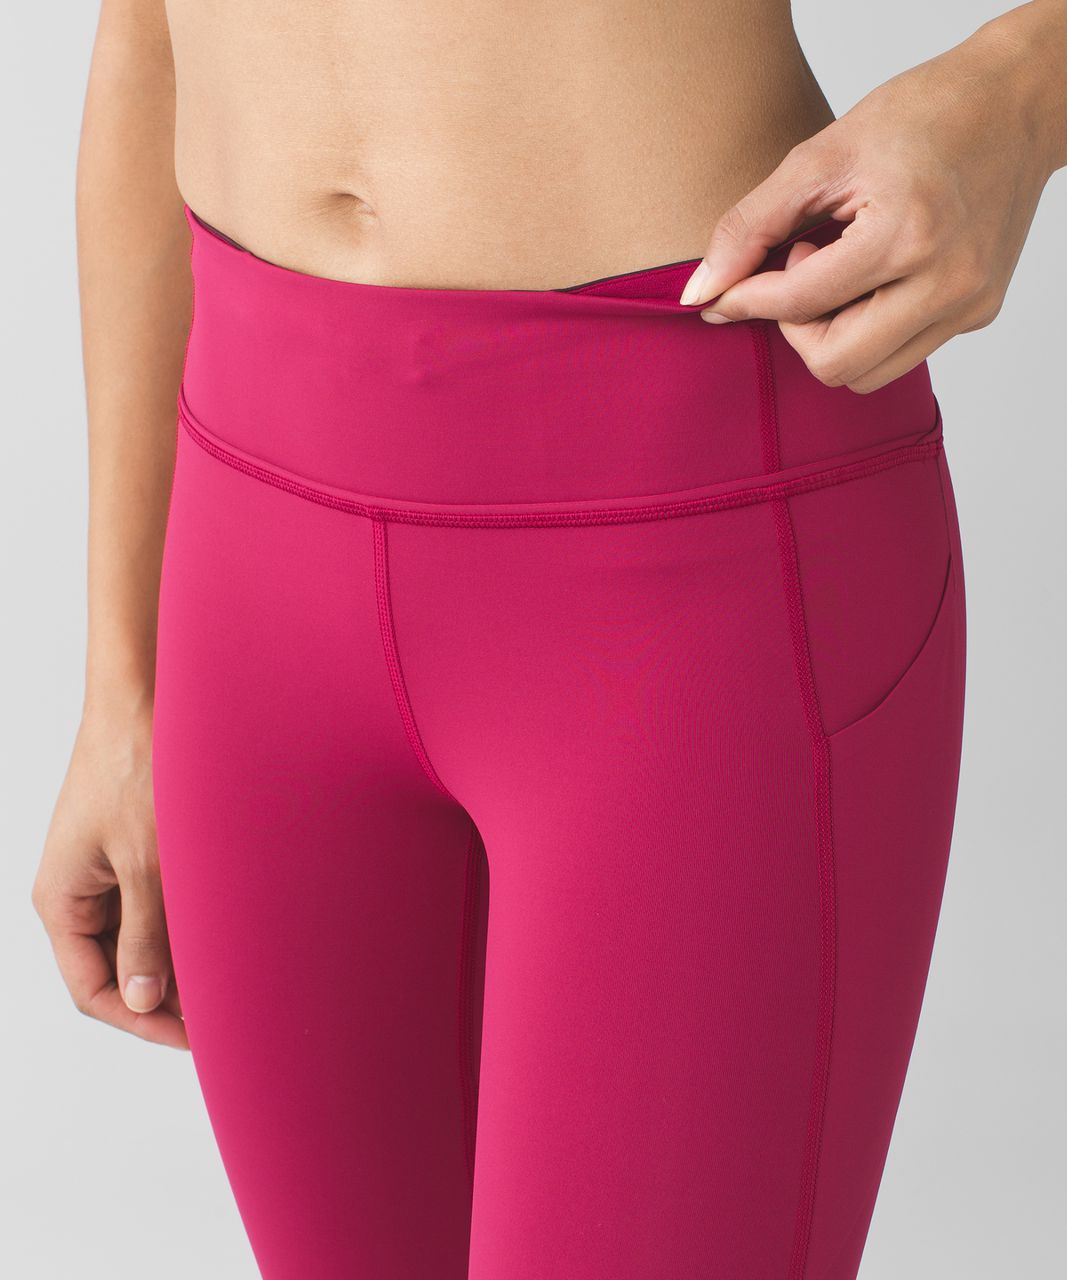 Lululemon Pace Rival Crop - Berry Rumble